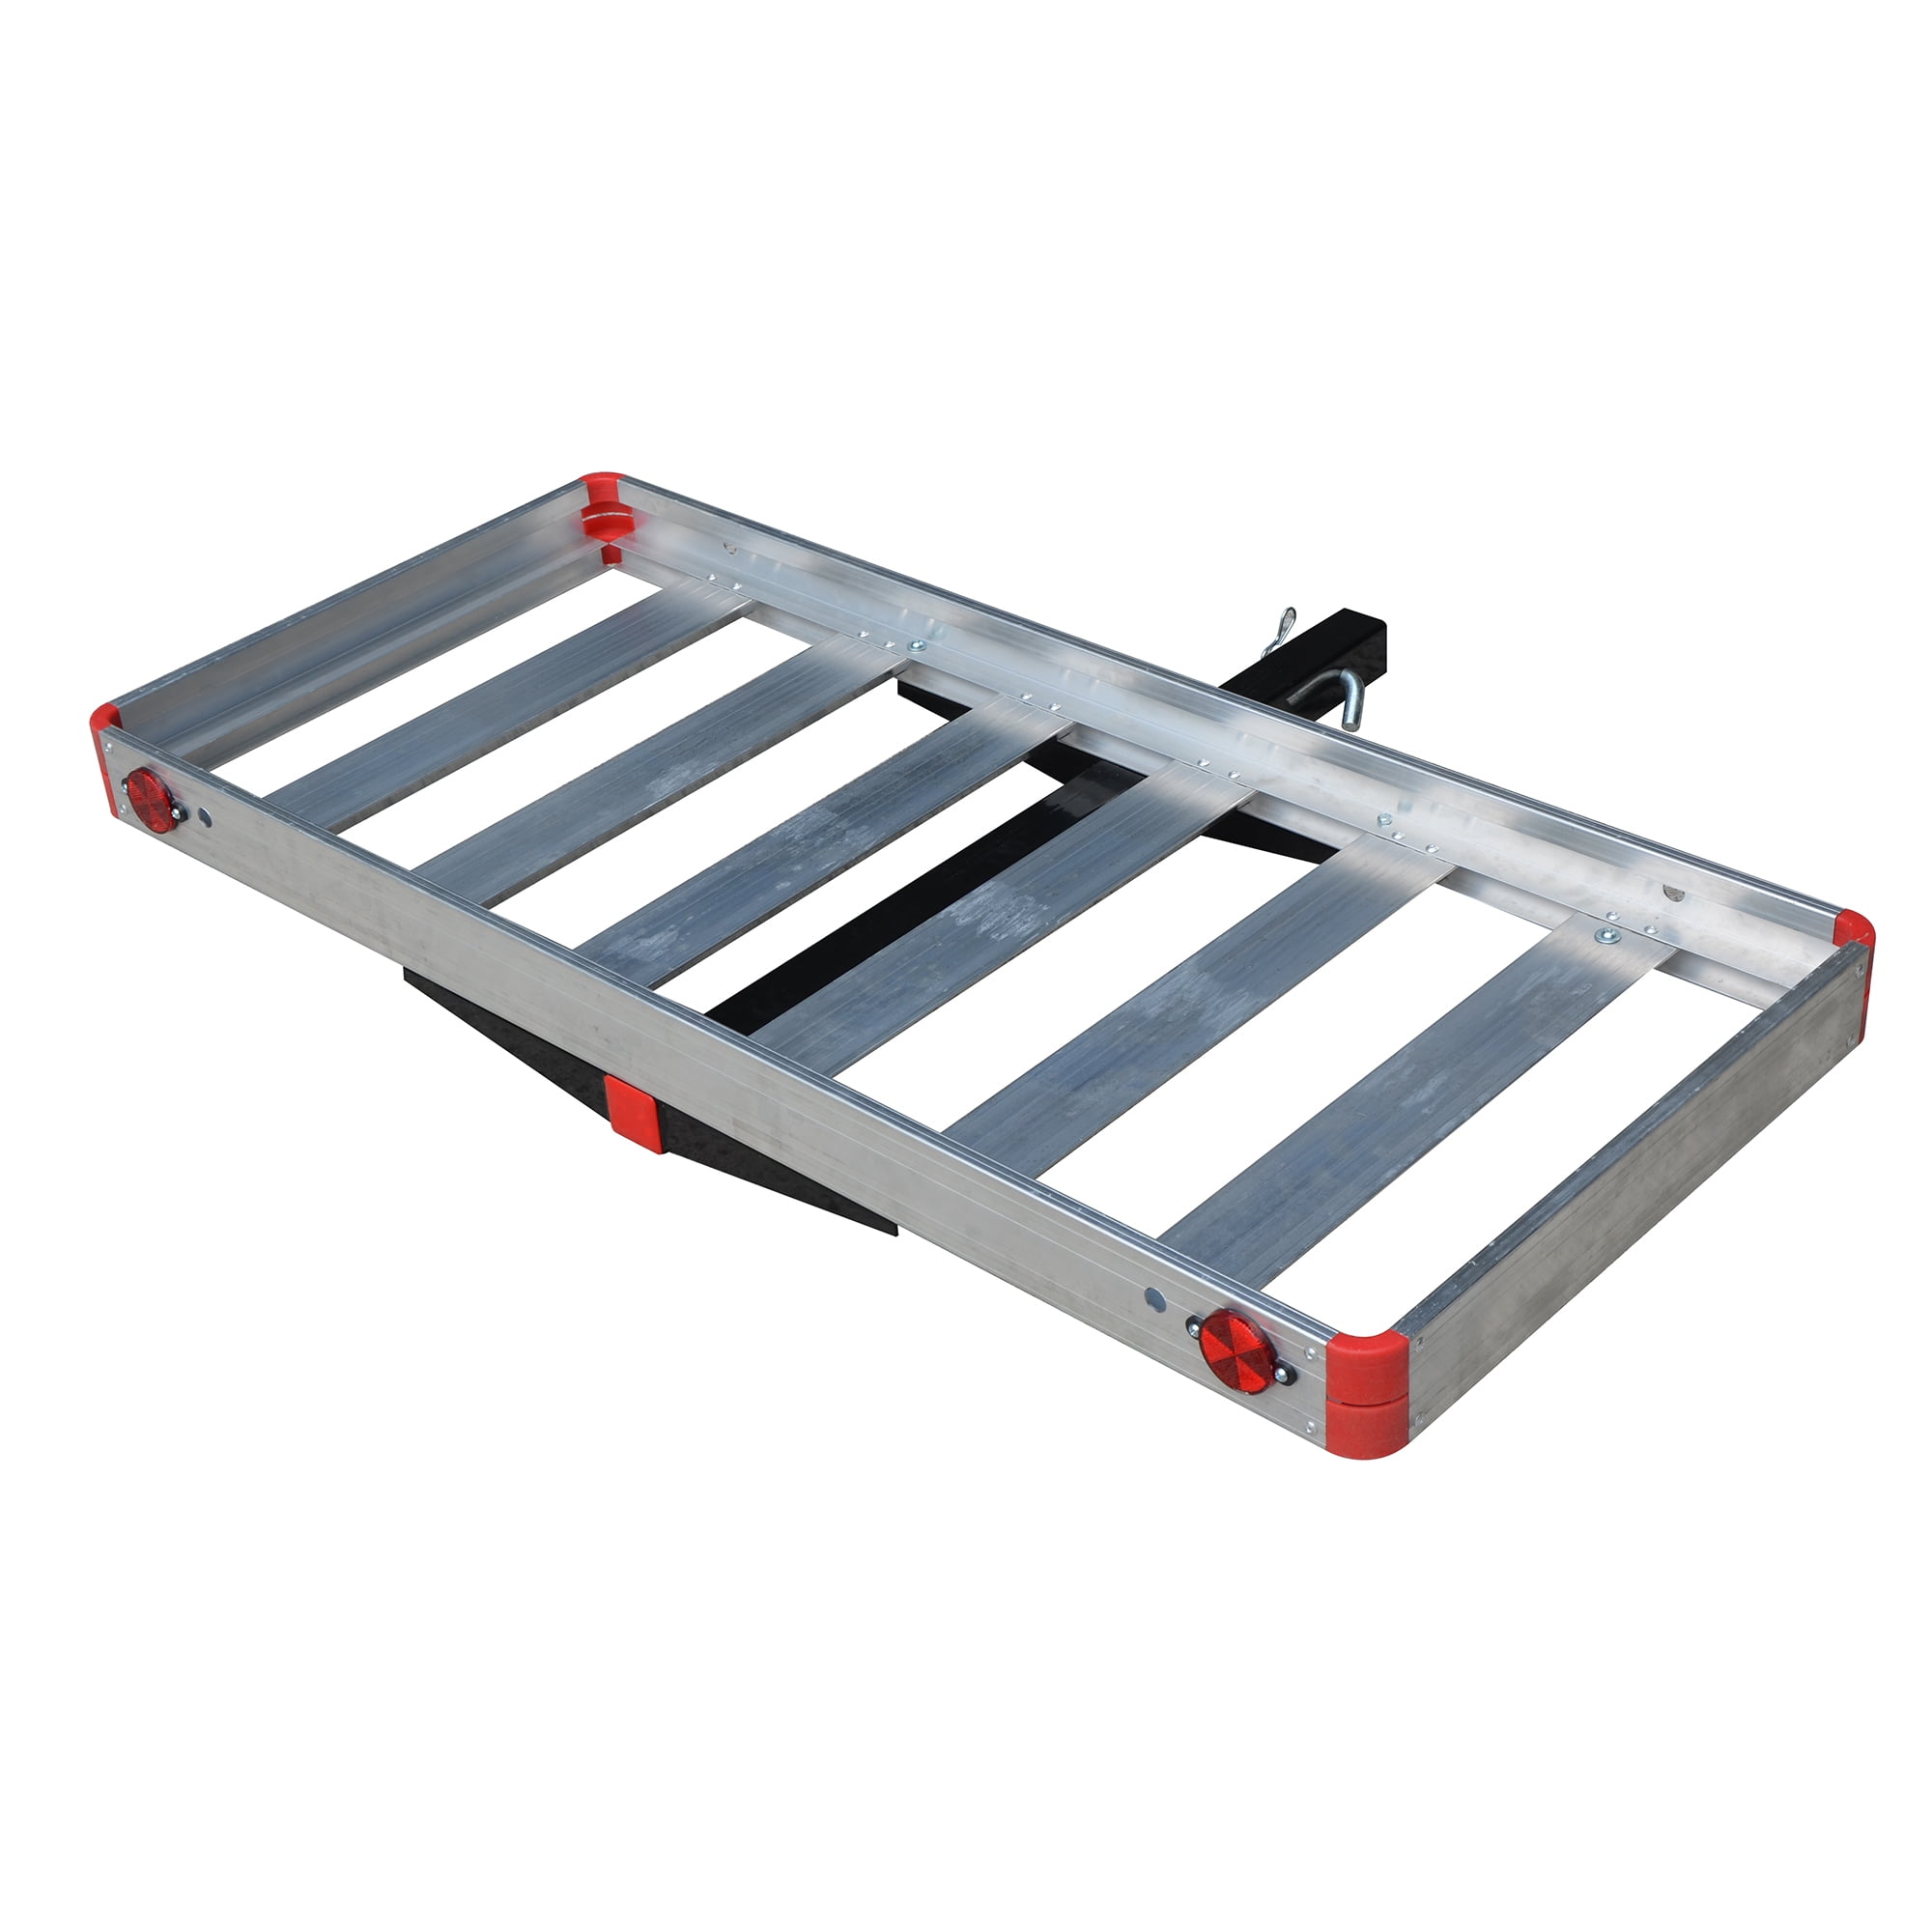 Max load. Curt Aluminum Ramp & Basket-Style Hitch Cargo Carriers. 333636 Cargo. Max Carriers Inc.